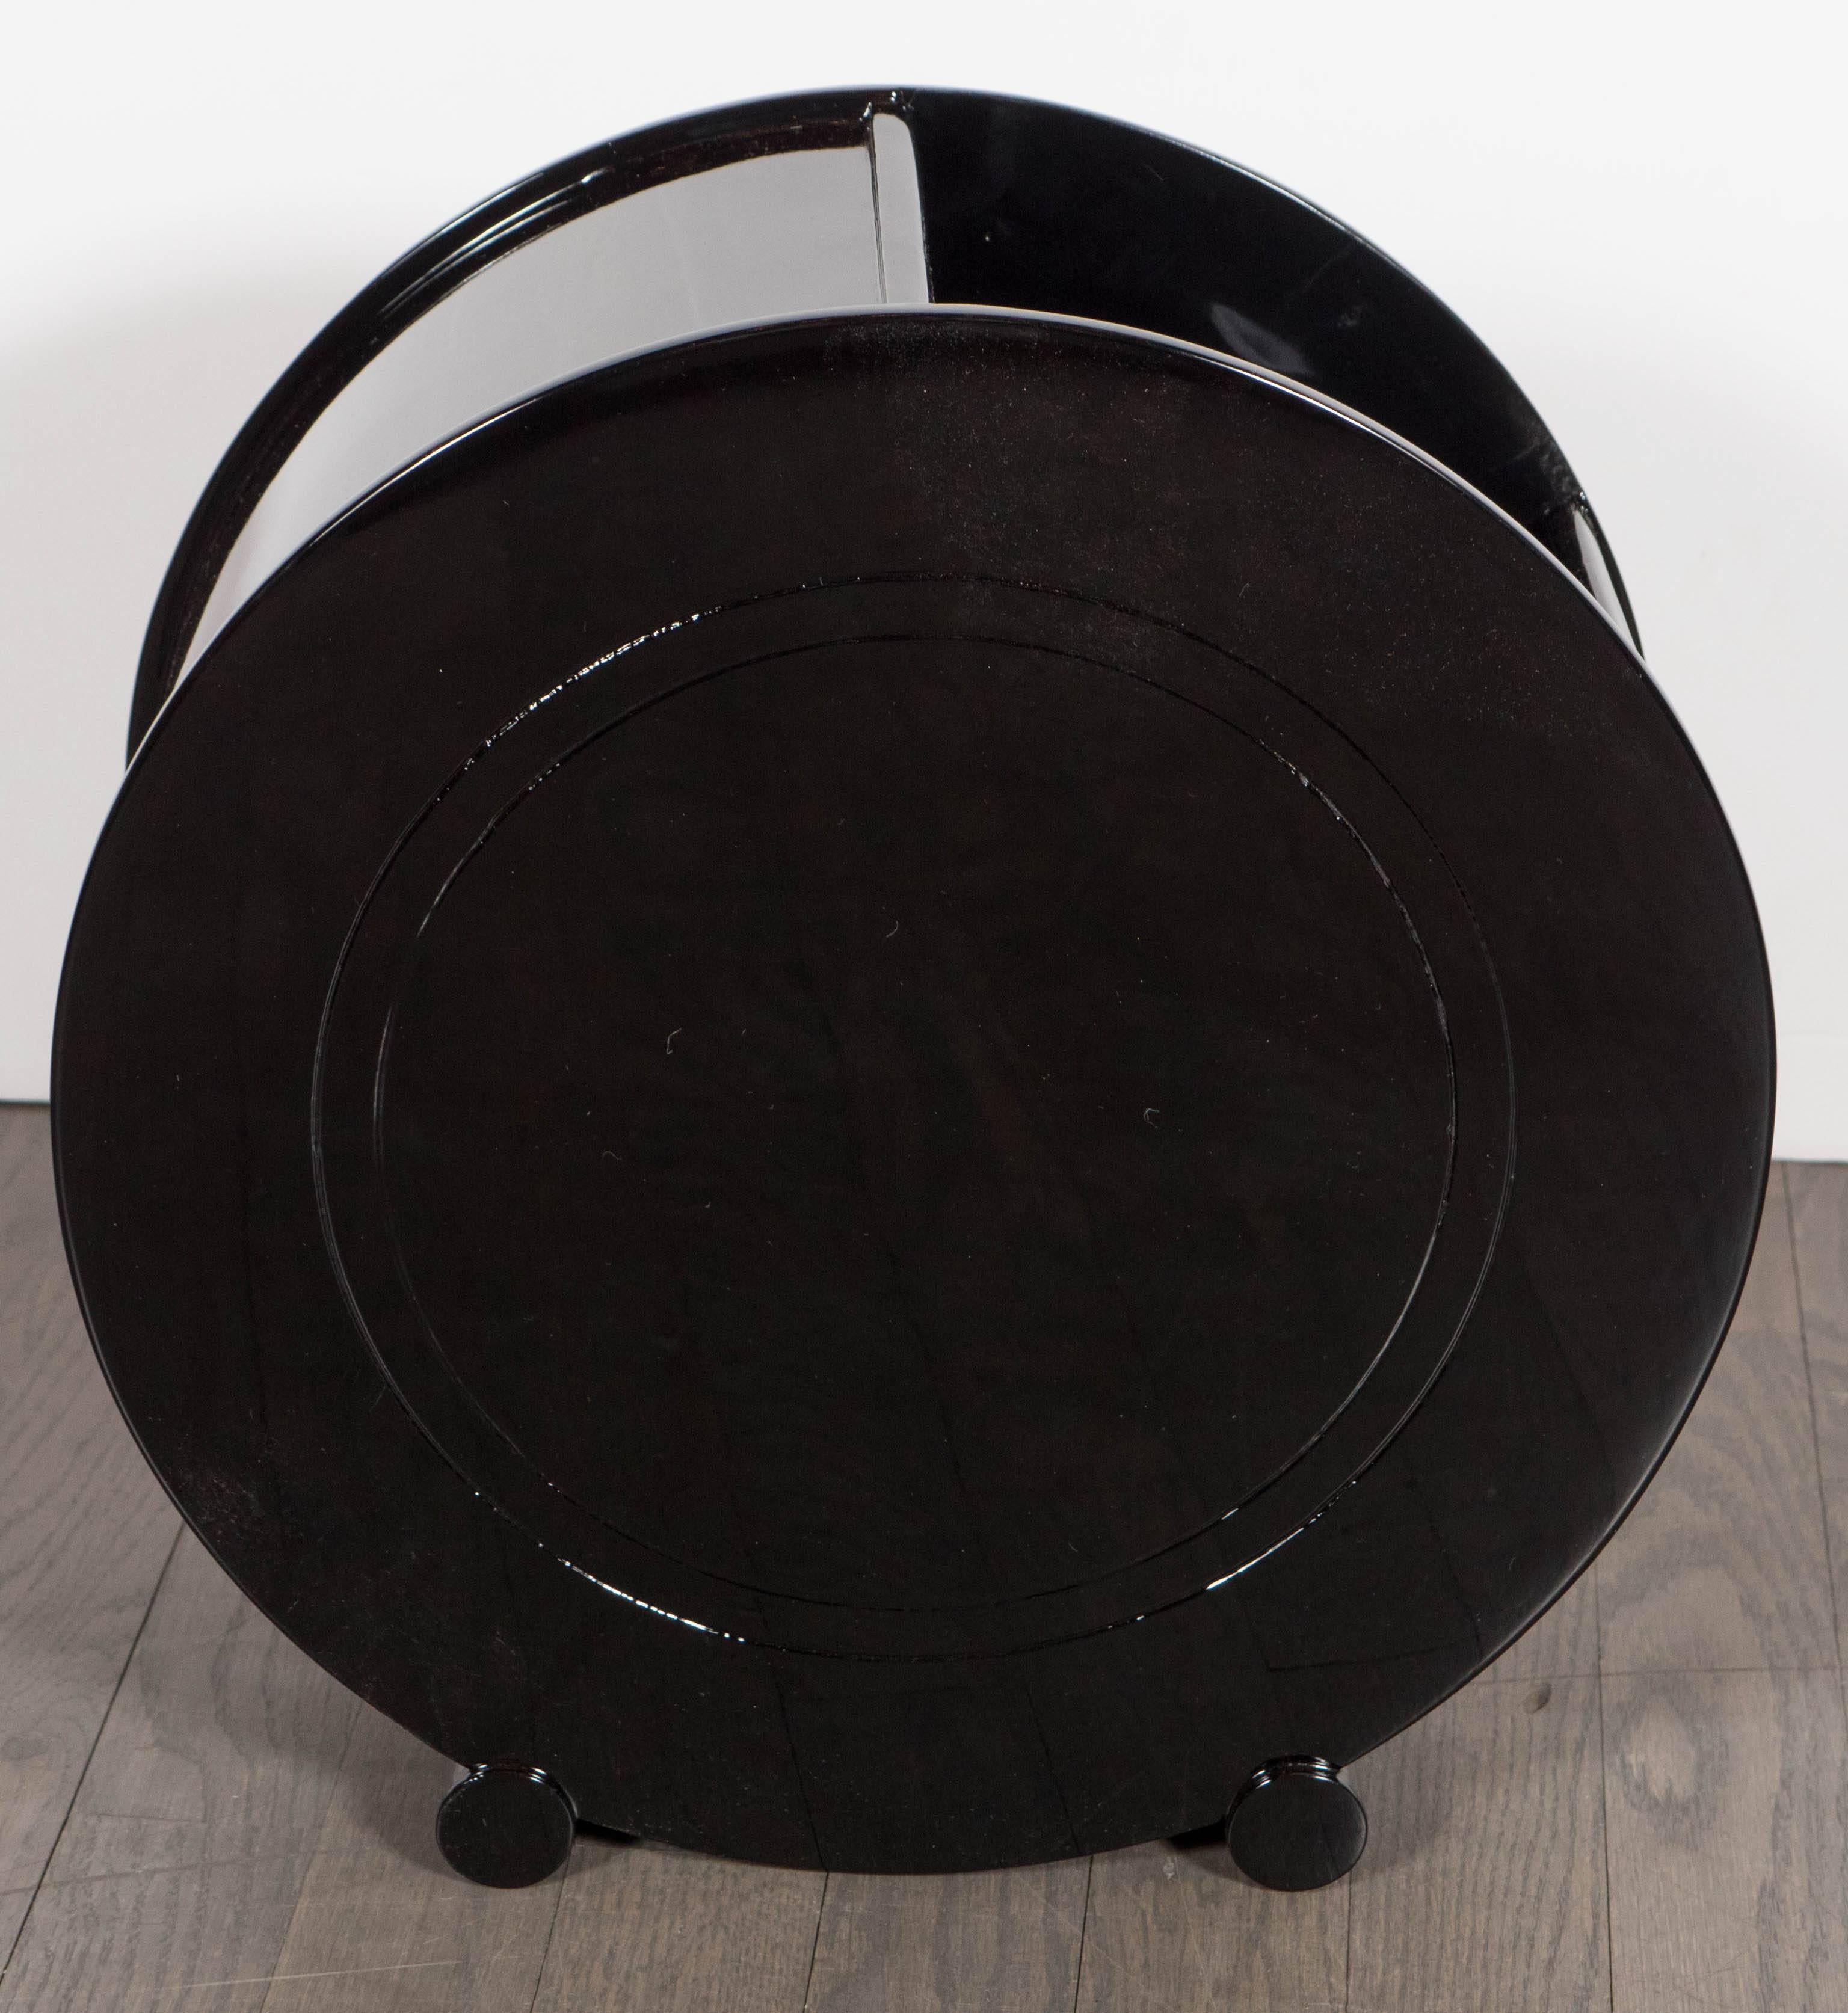 A rare and exceptional Art Deco machine age waste basket attributed to Donald Deskey, finished in black lacquer with a circular streamlined design. It features a concentric circular etched detail following the form. Restored to mint condition.